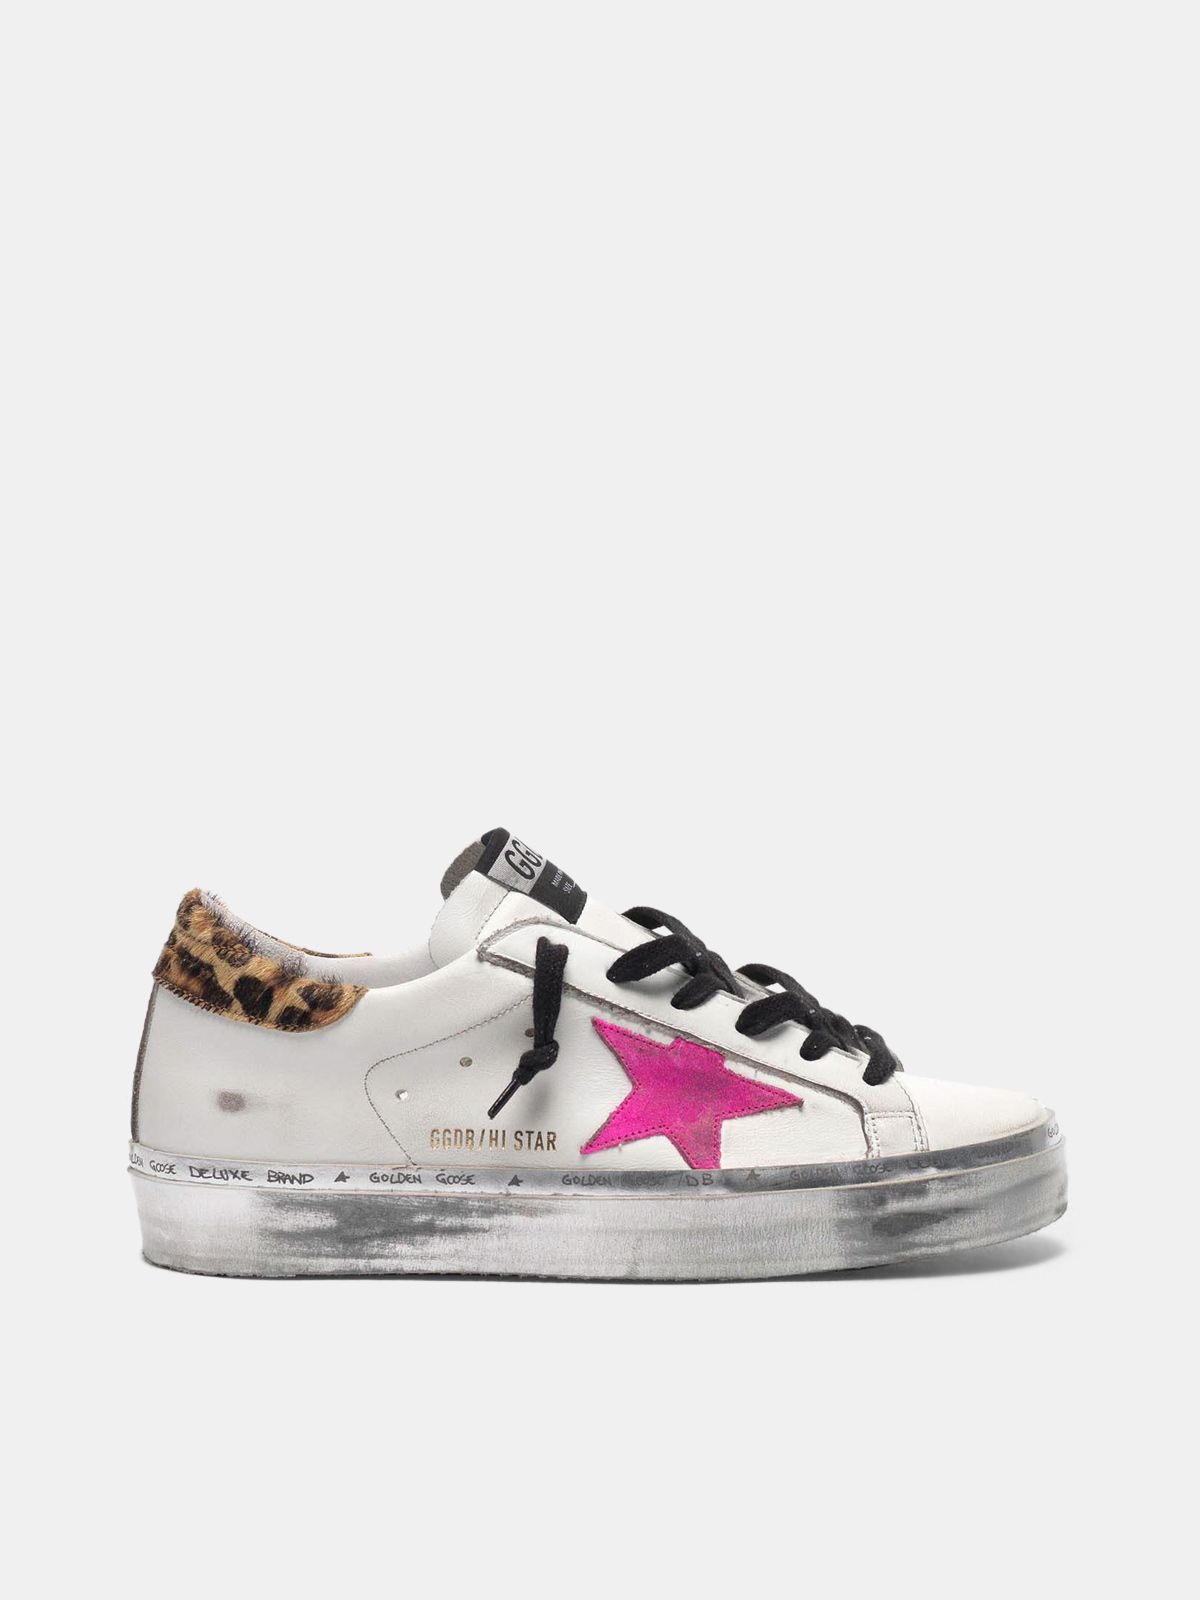 golden goose sneakers star and leopard-print with Star heel fuchsia Hi tab